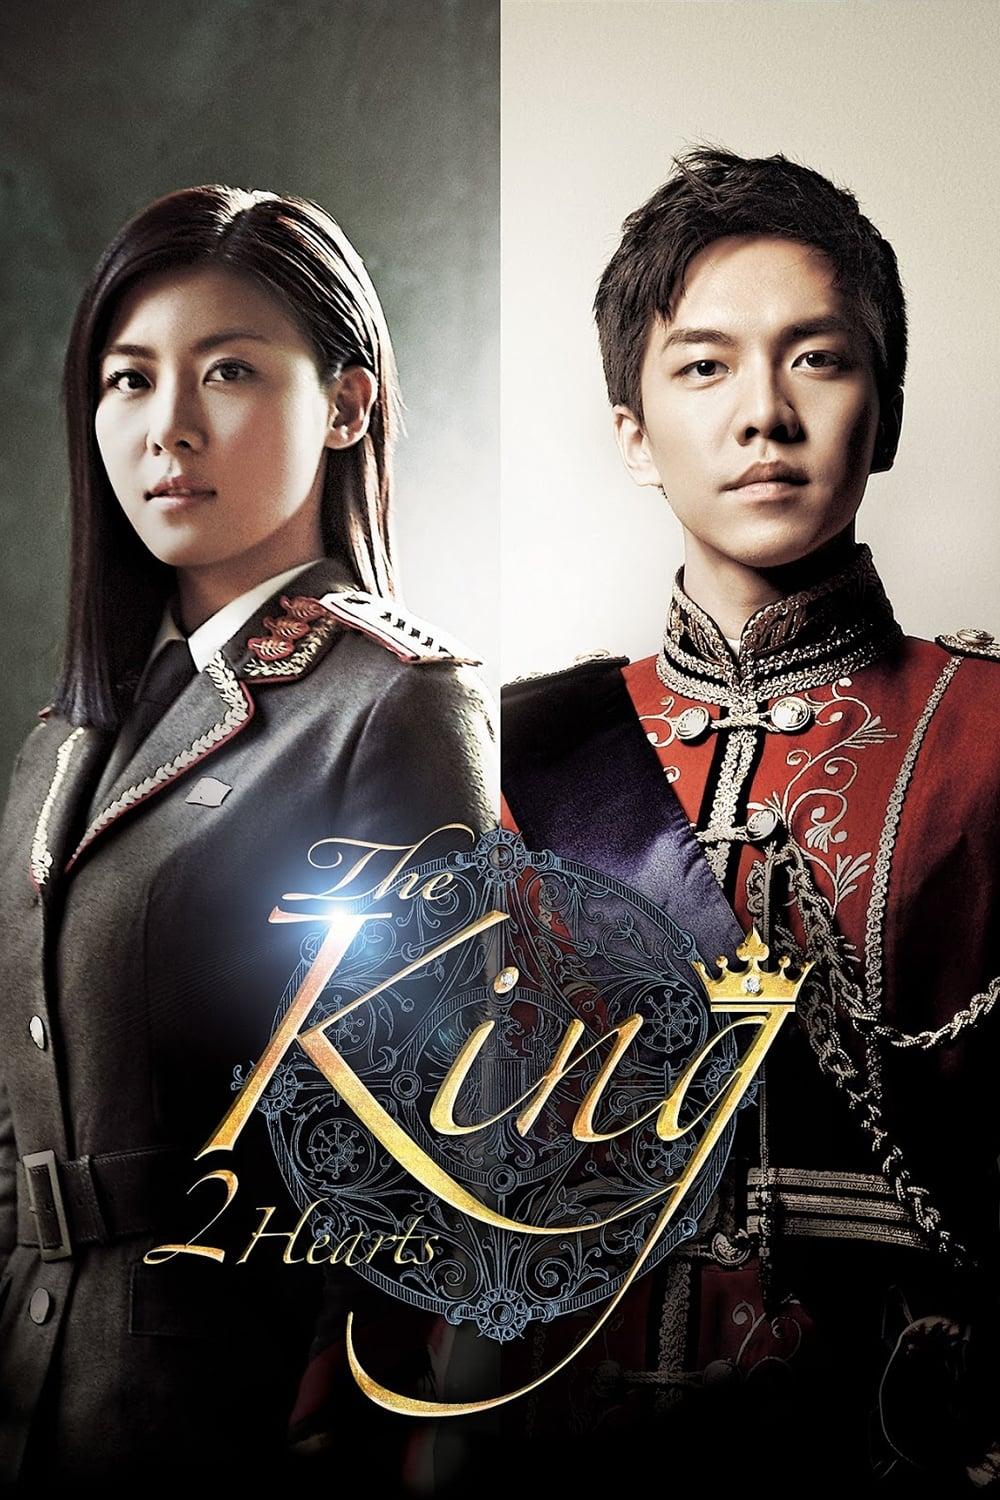 The King 2 Hearts poster